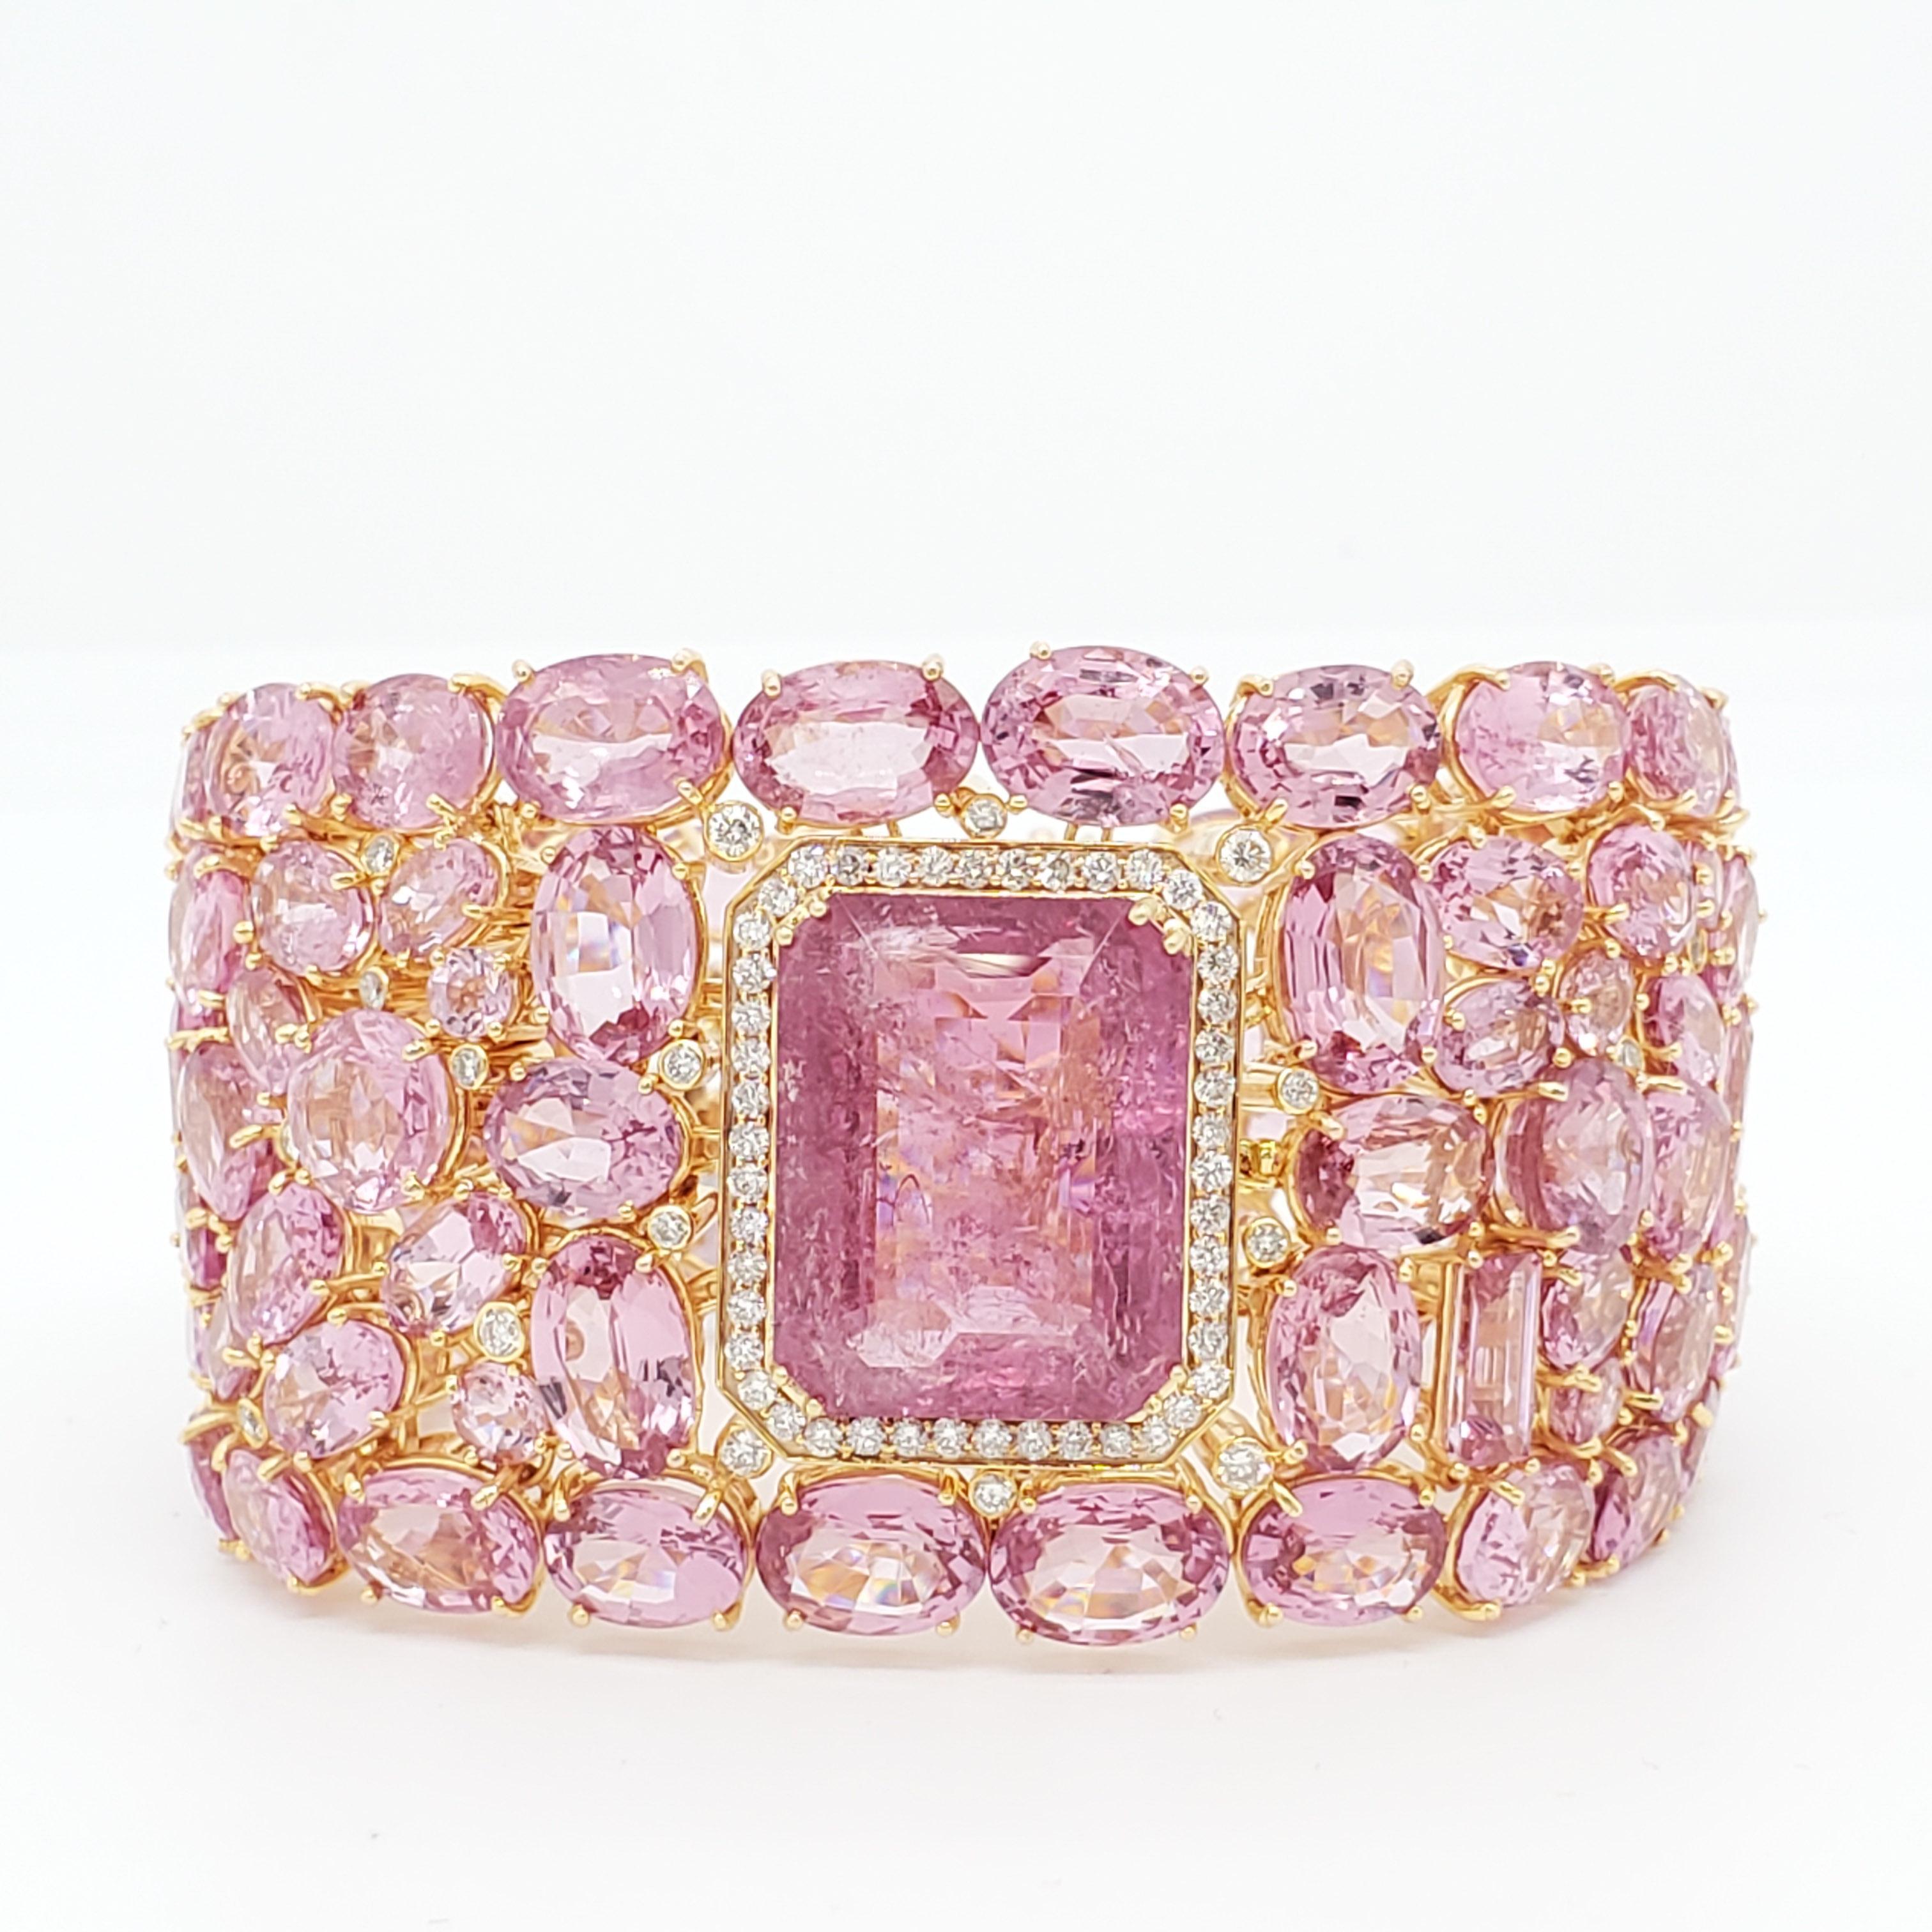 Pink Spinel Emerald Cut, Mixed Cut Spinel and Diamond Cluster Bracelet in 18k In New Condition For Sale In Los Angeles, CA